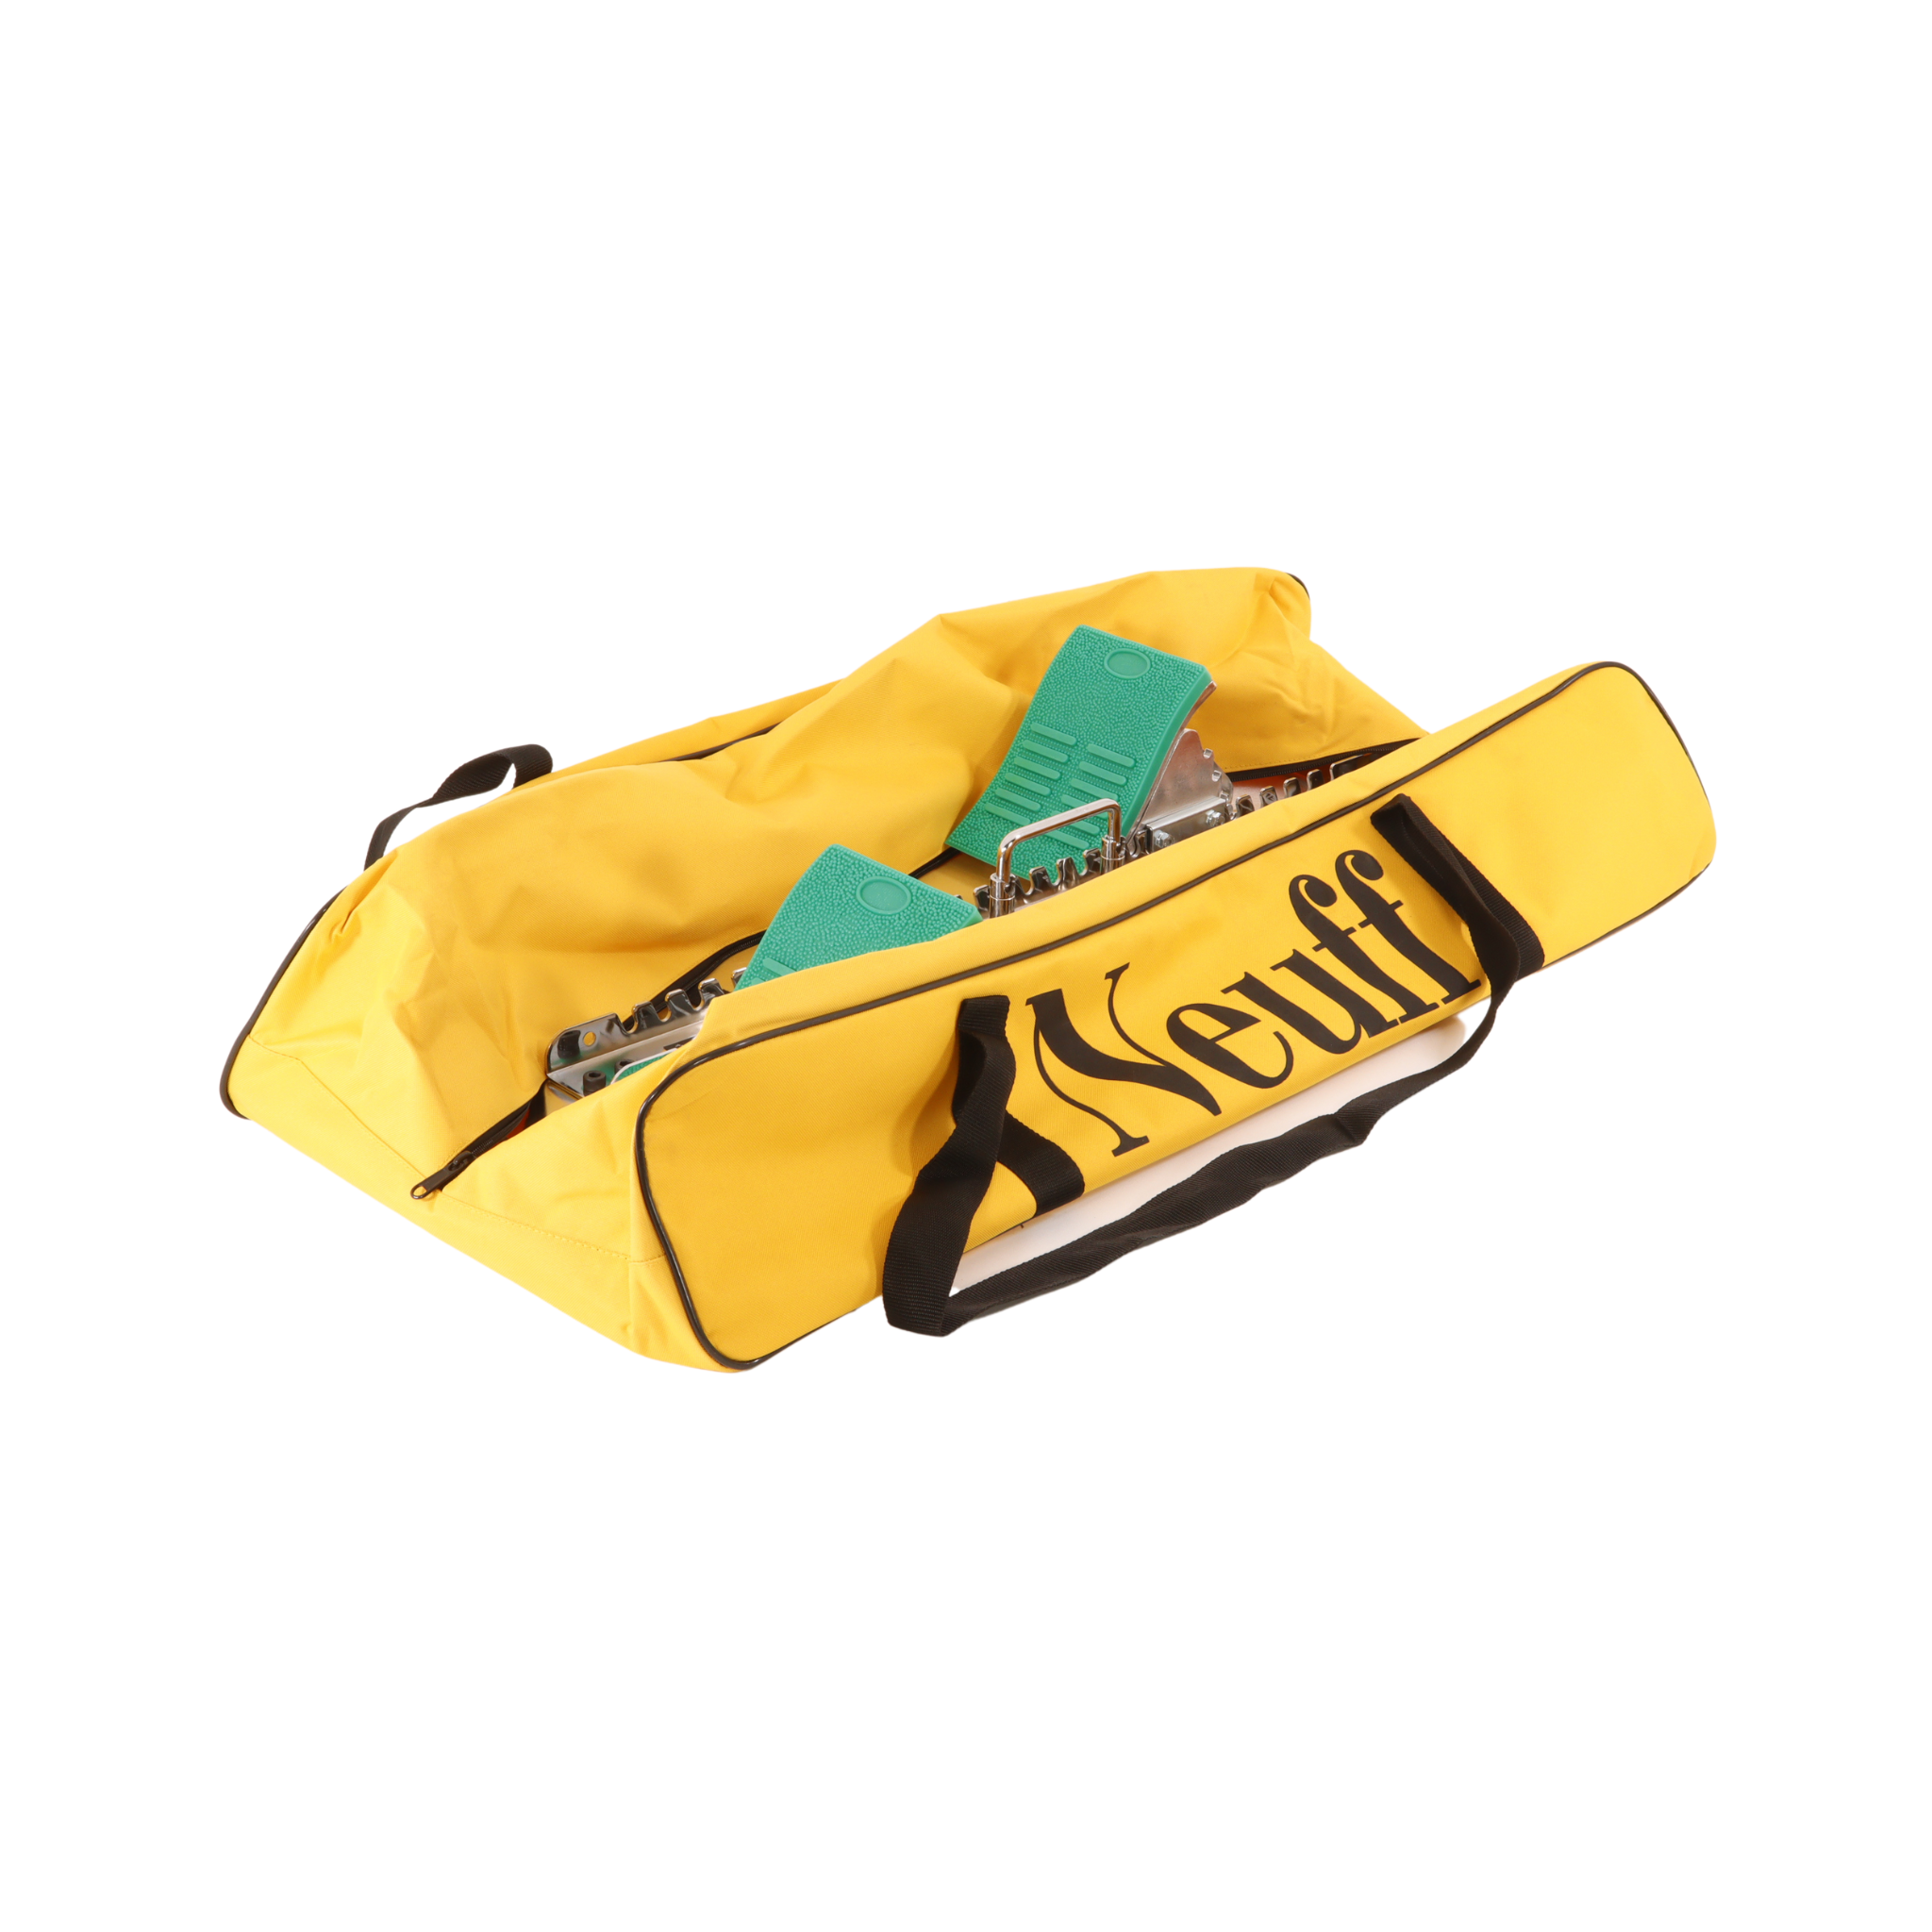 Neuff Starting Block Bag with a set of sprint blocks inside | Yellow bag with Black Neuff Brand